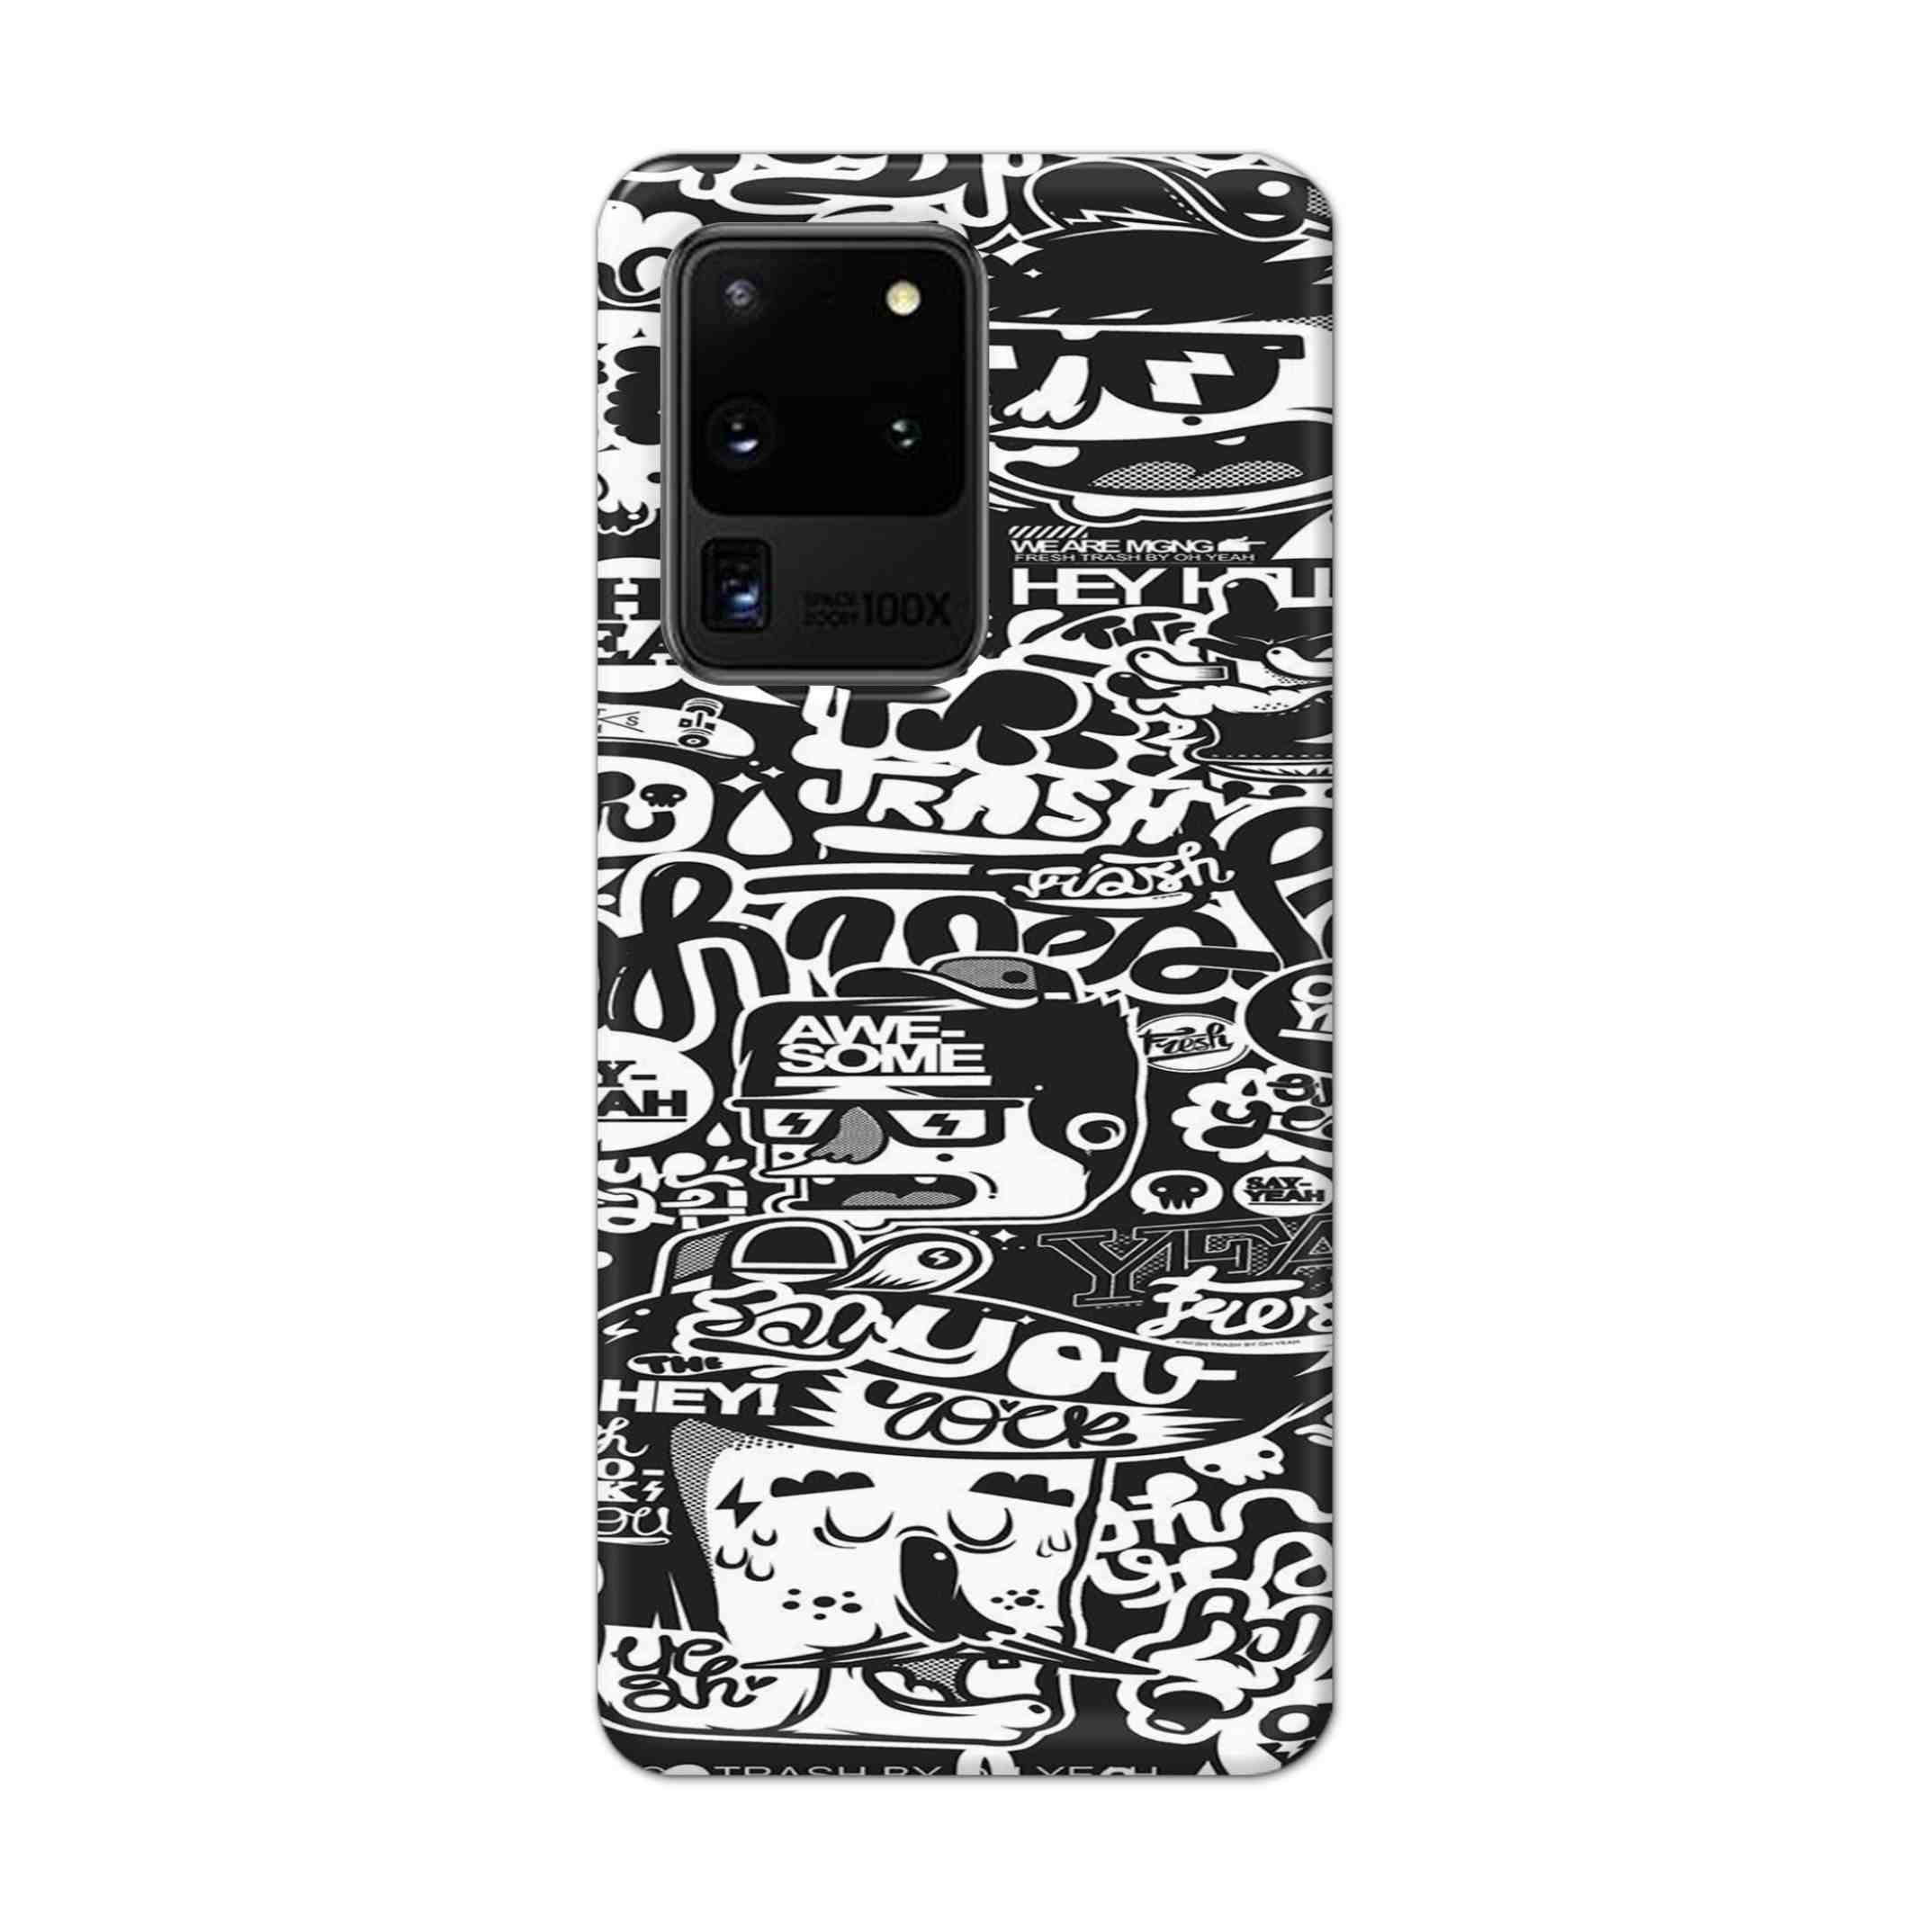 Buy Awesome Hard Back Mobile Phone Case Cover For Samsung Galaxy S20 Ultra Online